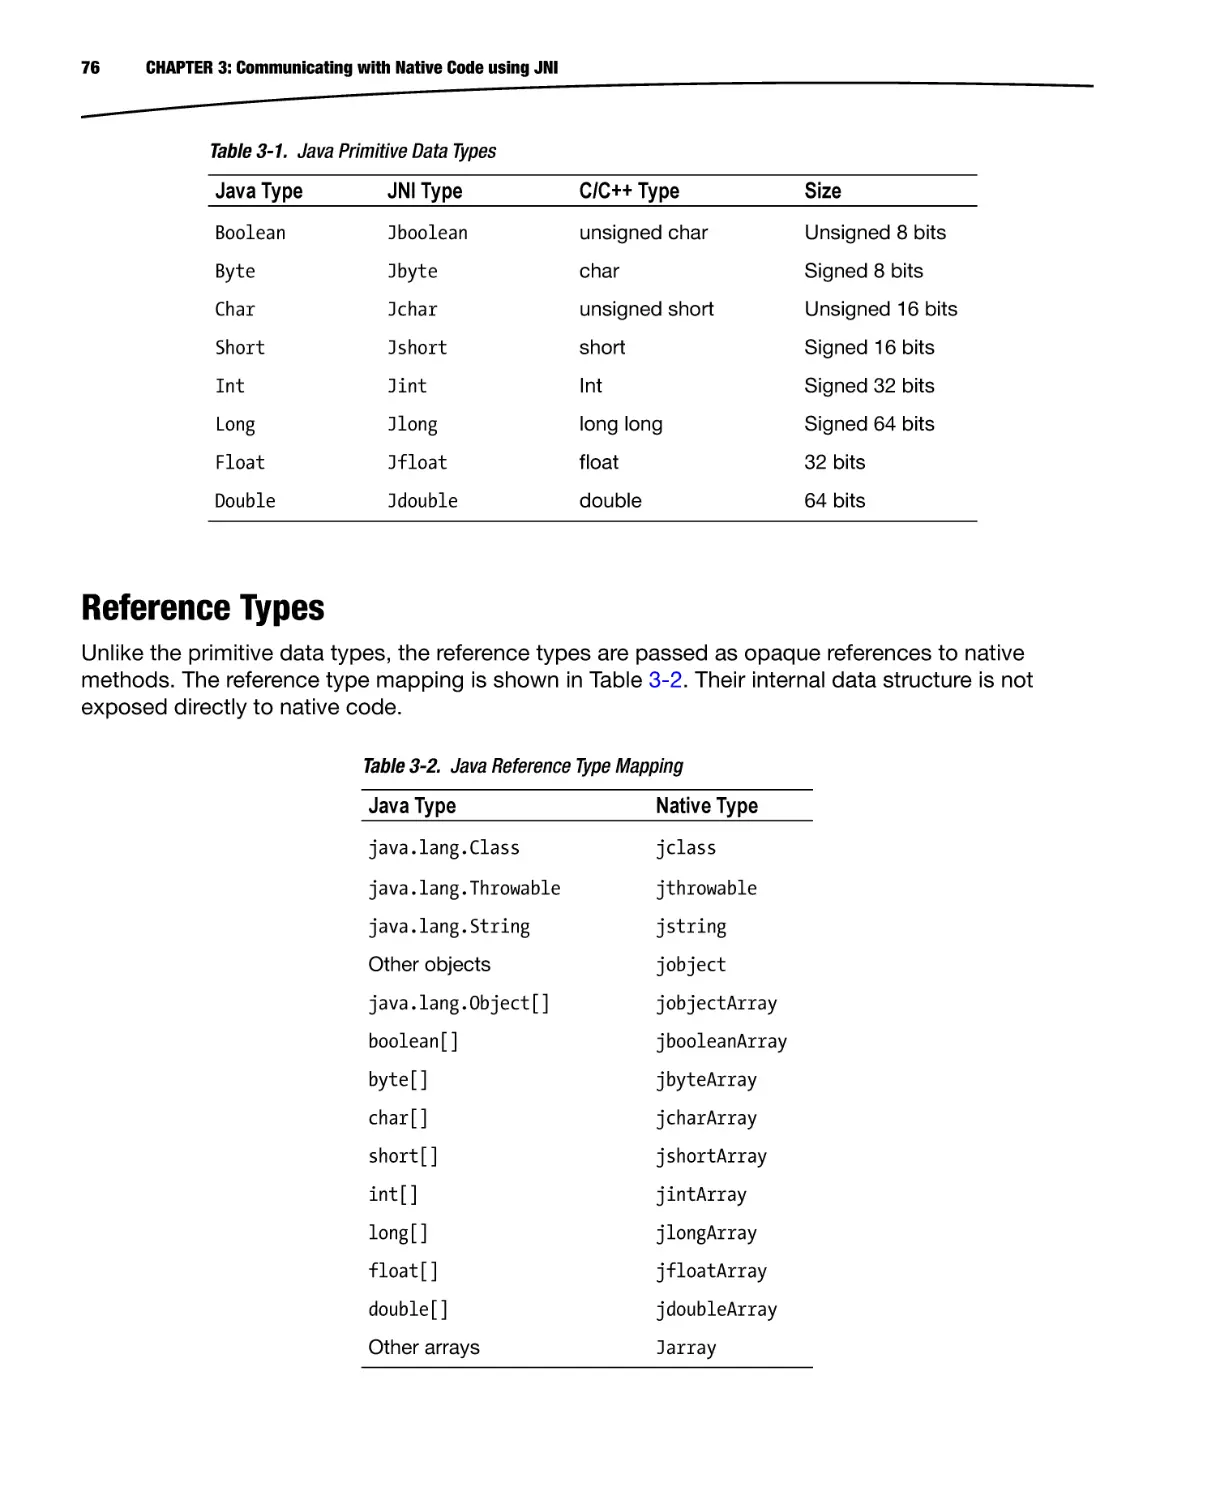 Reference Types